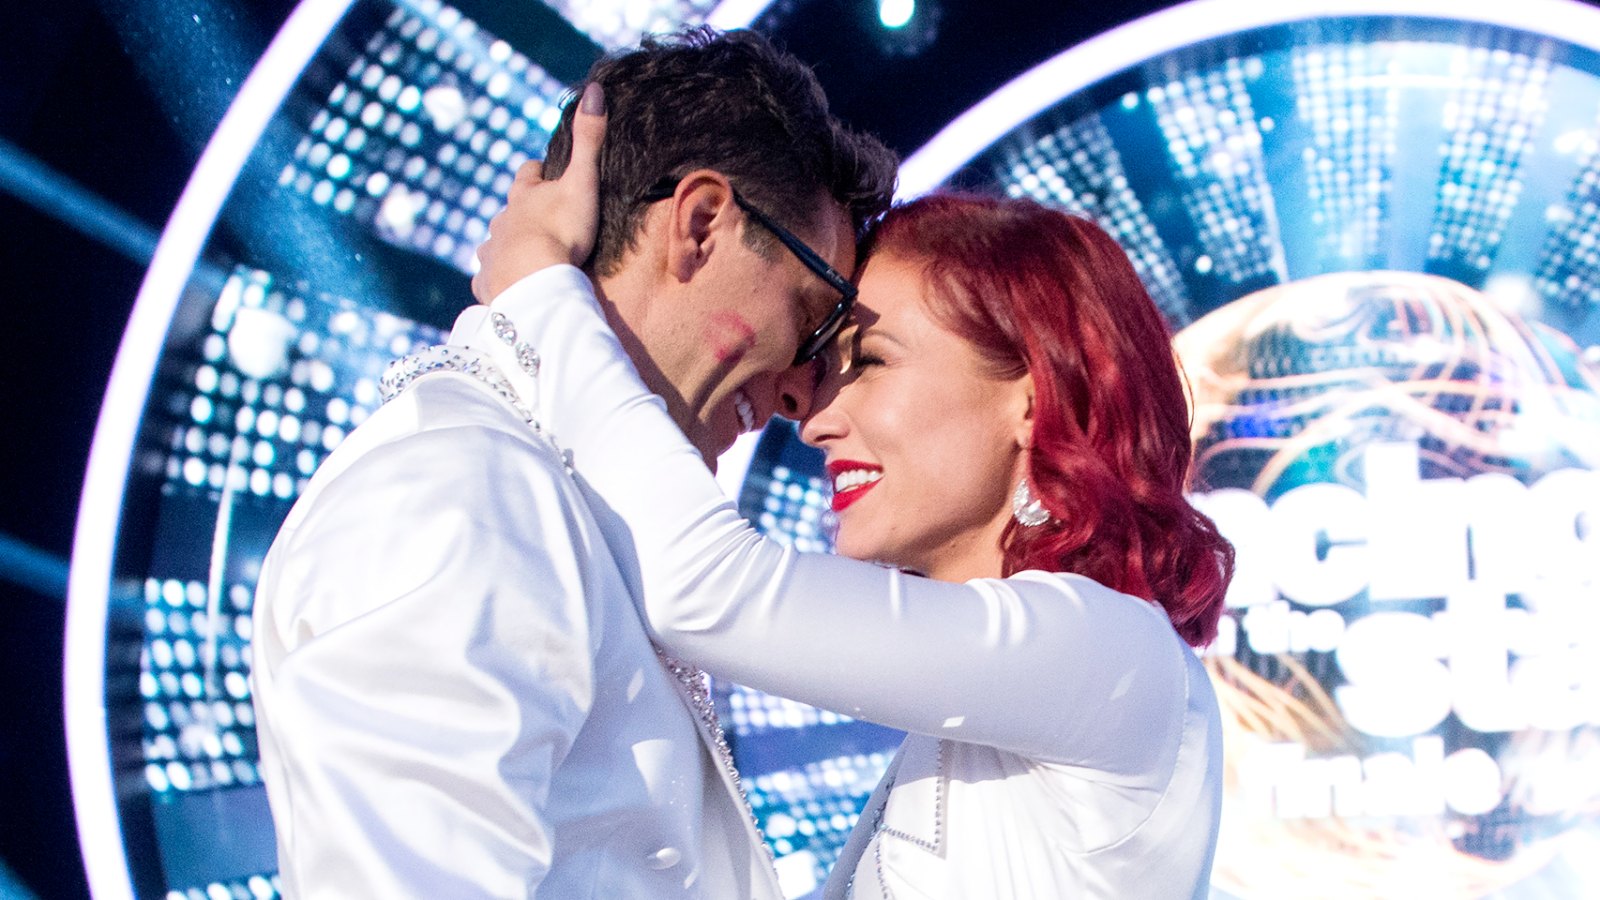 Bobby Bones and Sharna Burgess on Dancing With The Stars